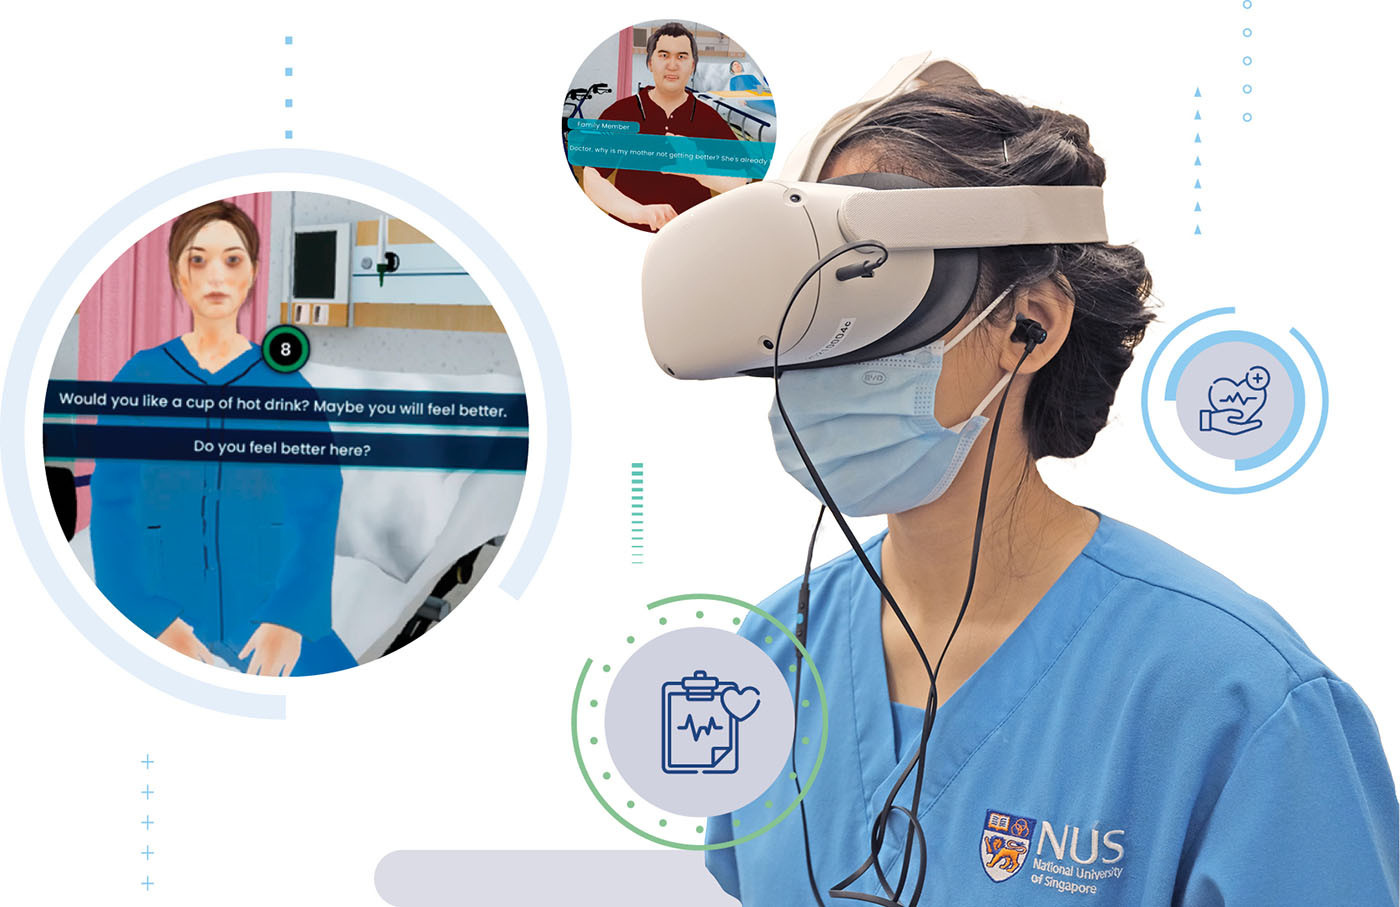 NUS Medine and Nursing Student using a virtual reality (VR) set in her training.